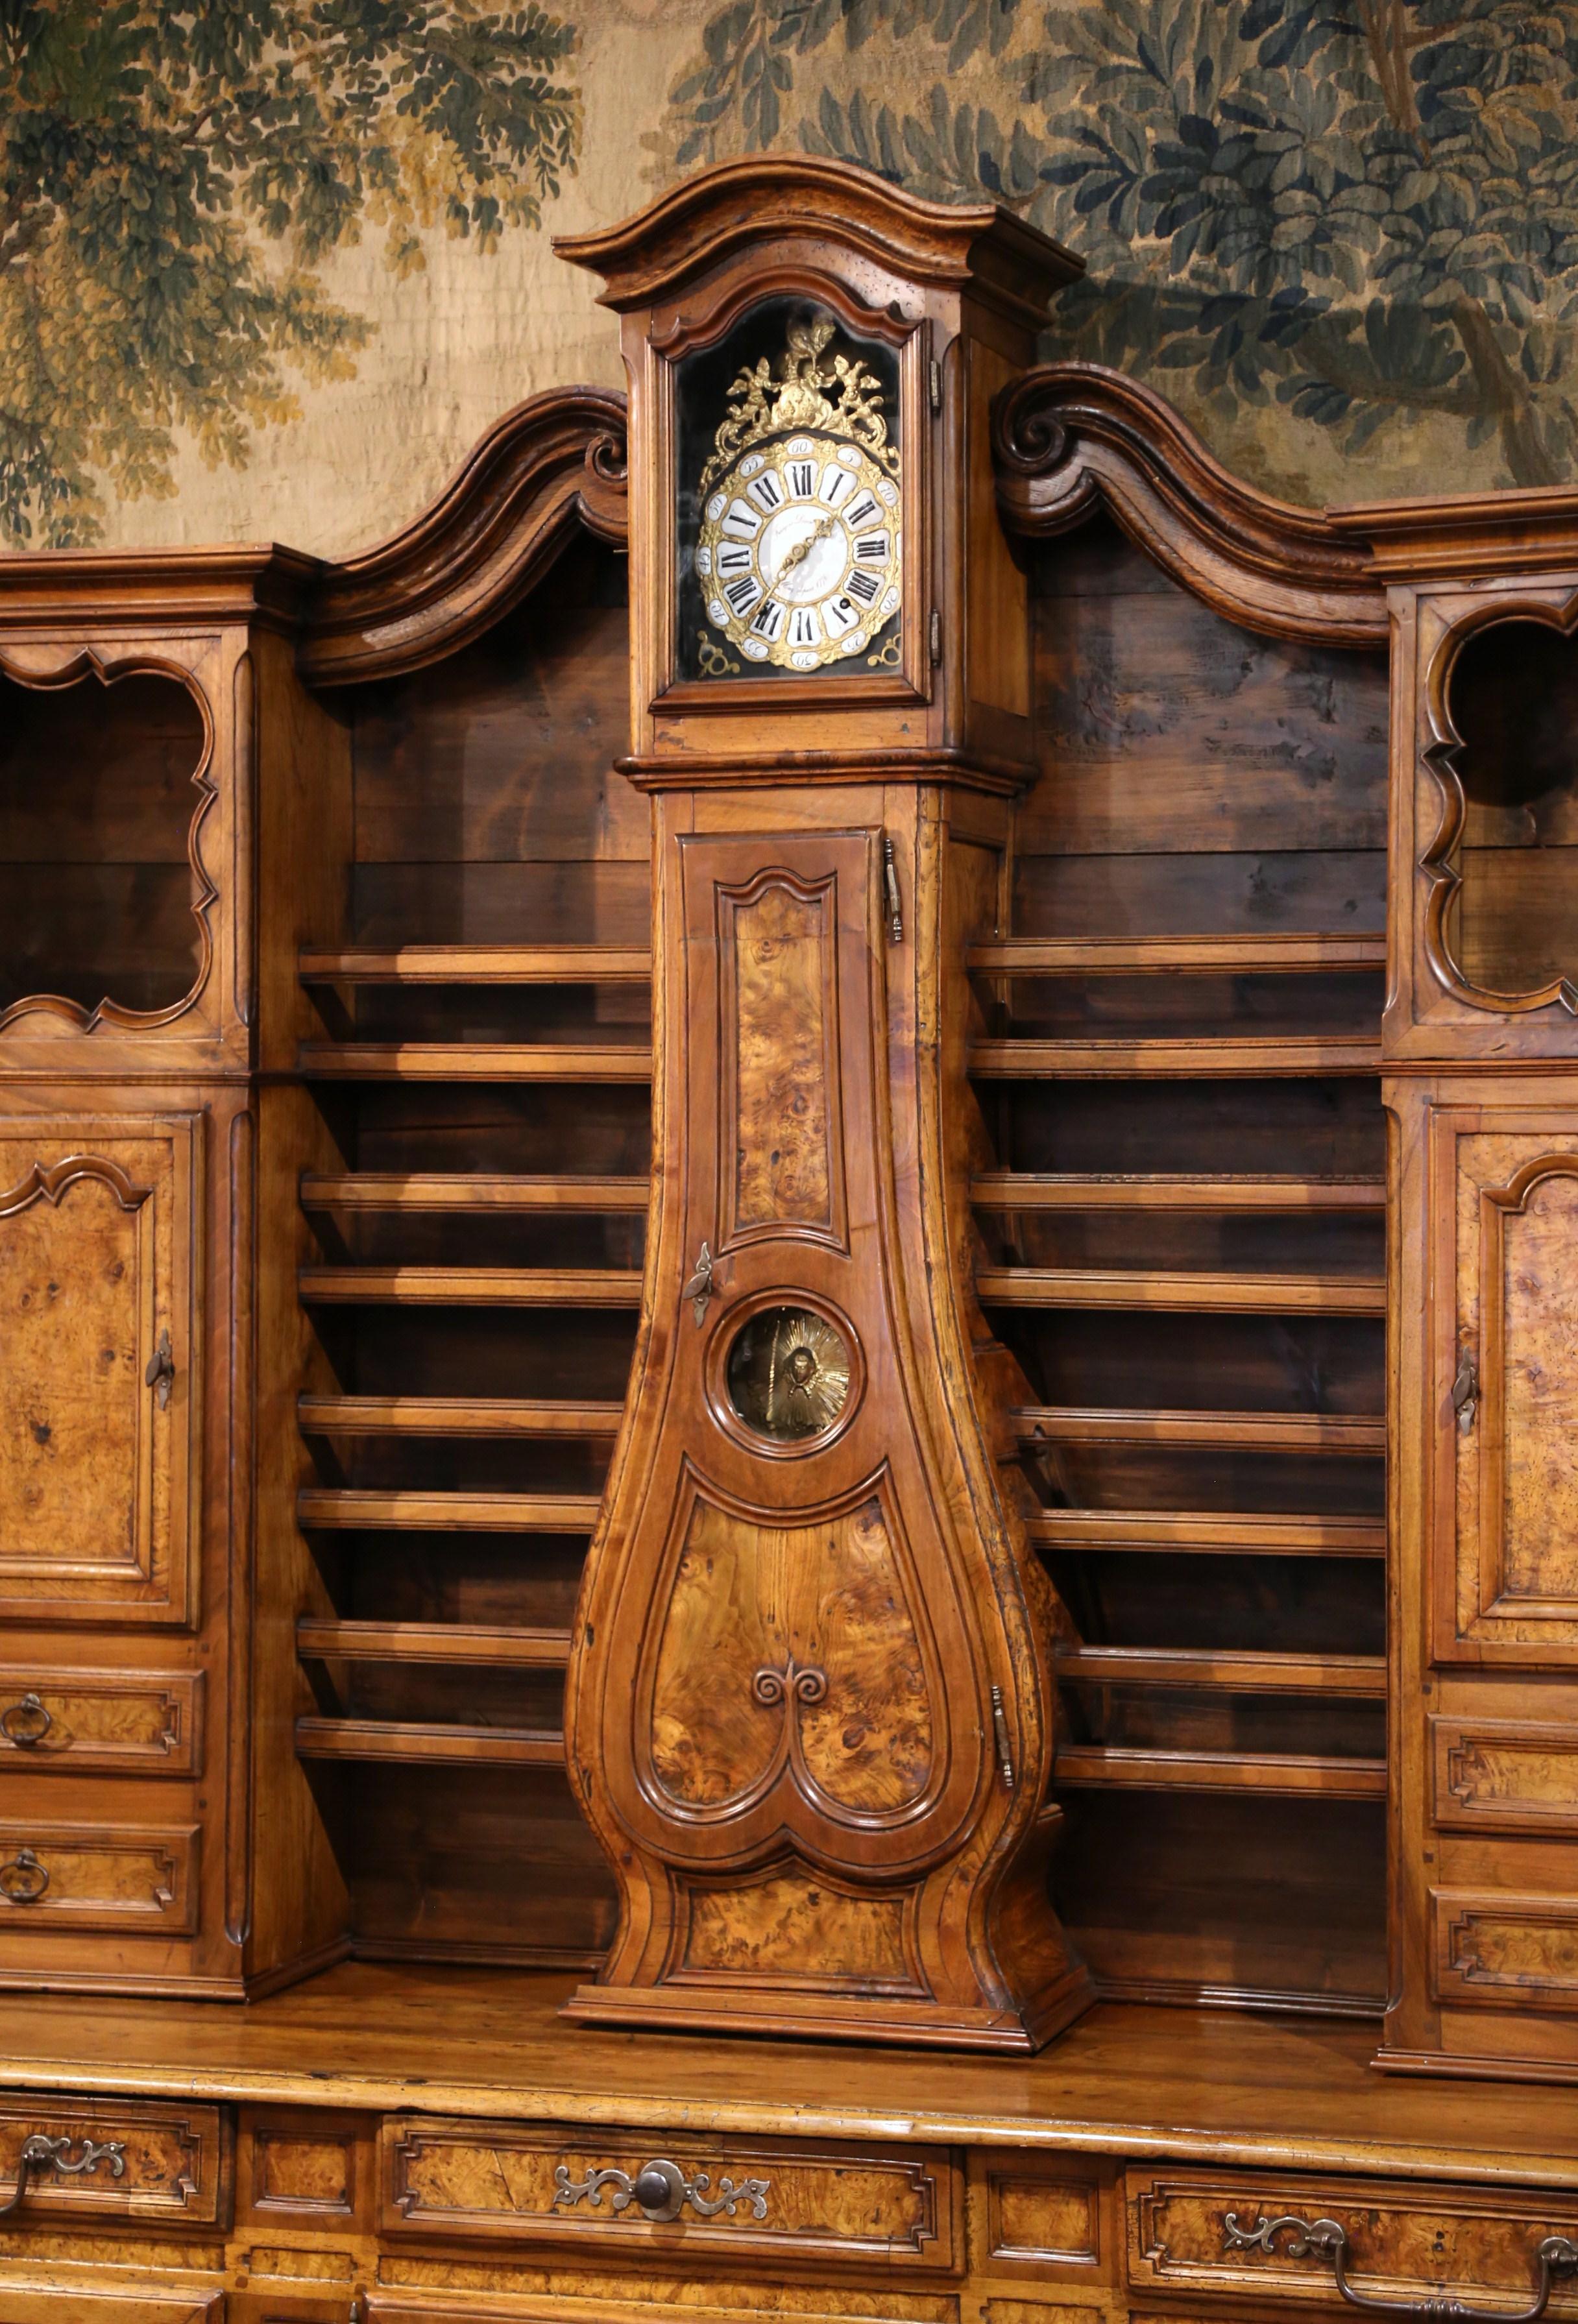 Hand carved in Southern France circa 1760, the large display cabinet decorated with floral and leaf motifs throughout, is built in two sections. The top part with volutes features a bonnet top over the clock casing with glass, a violin shape center